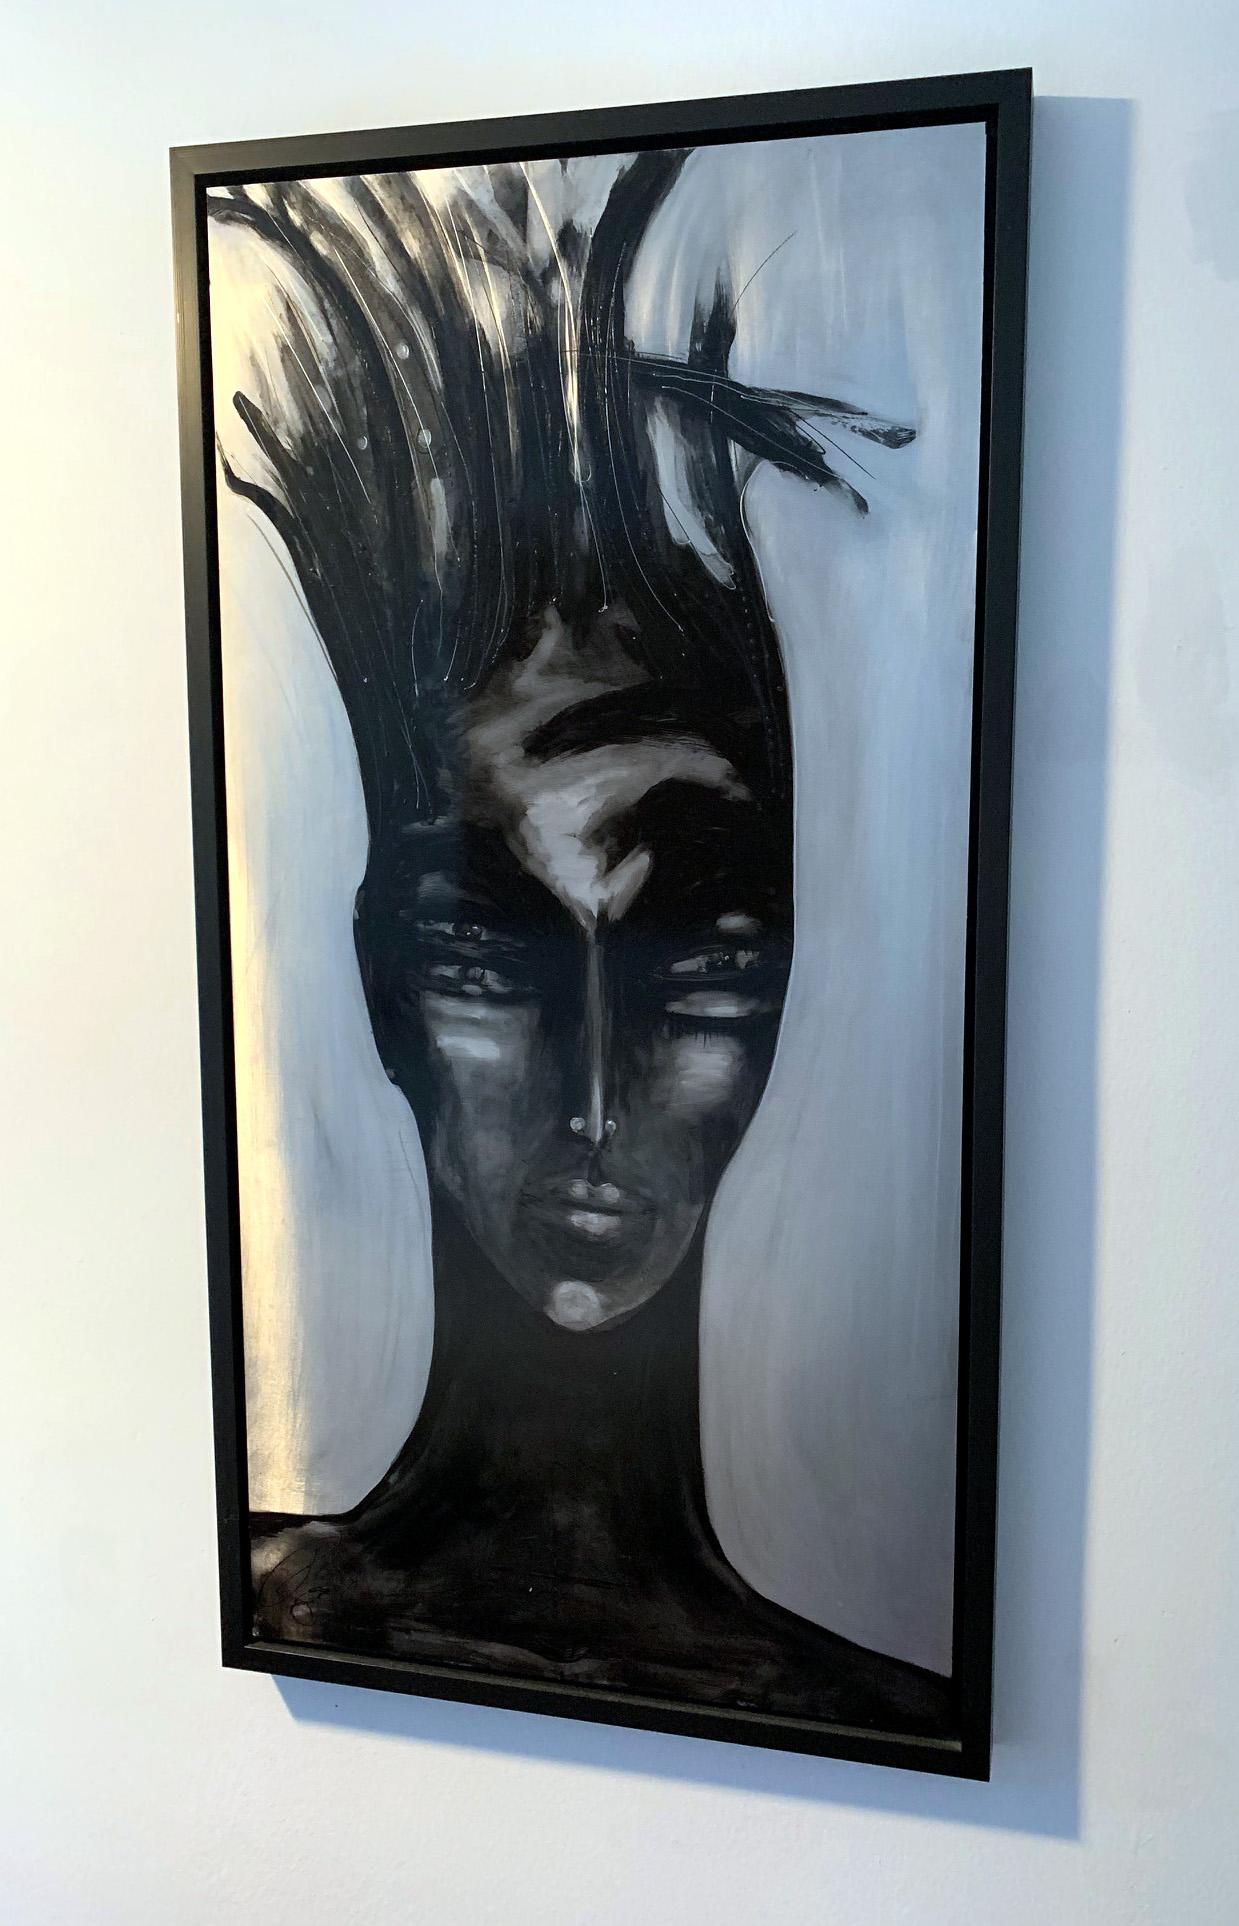 Medium: Paint on Aluminum with lacquer in wood frame
Title: Woman Focused
Artist: Marie-Josée Roy (Canadian) 
Measurement: 26.5